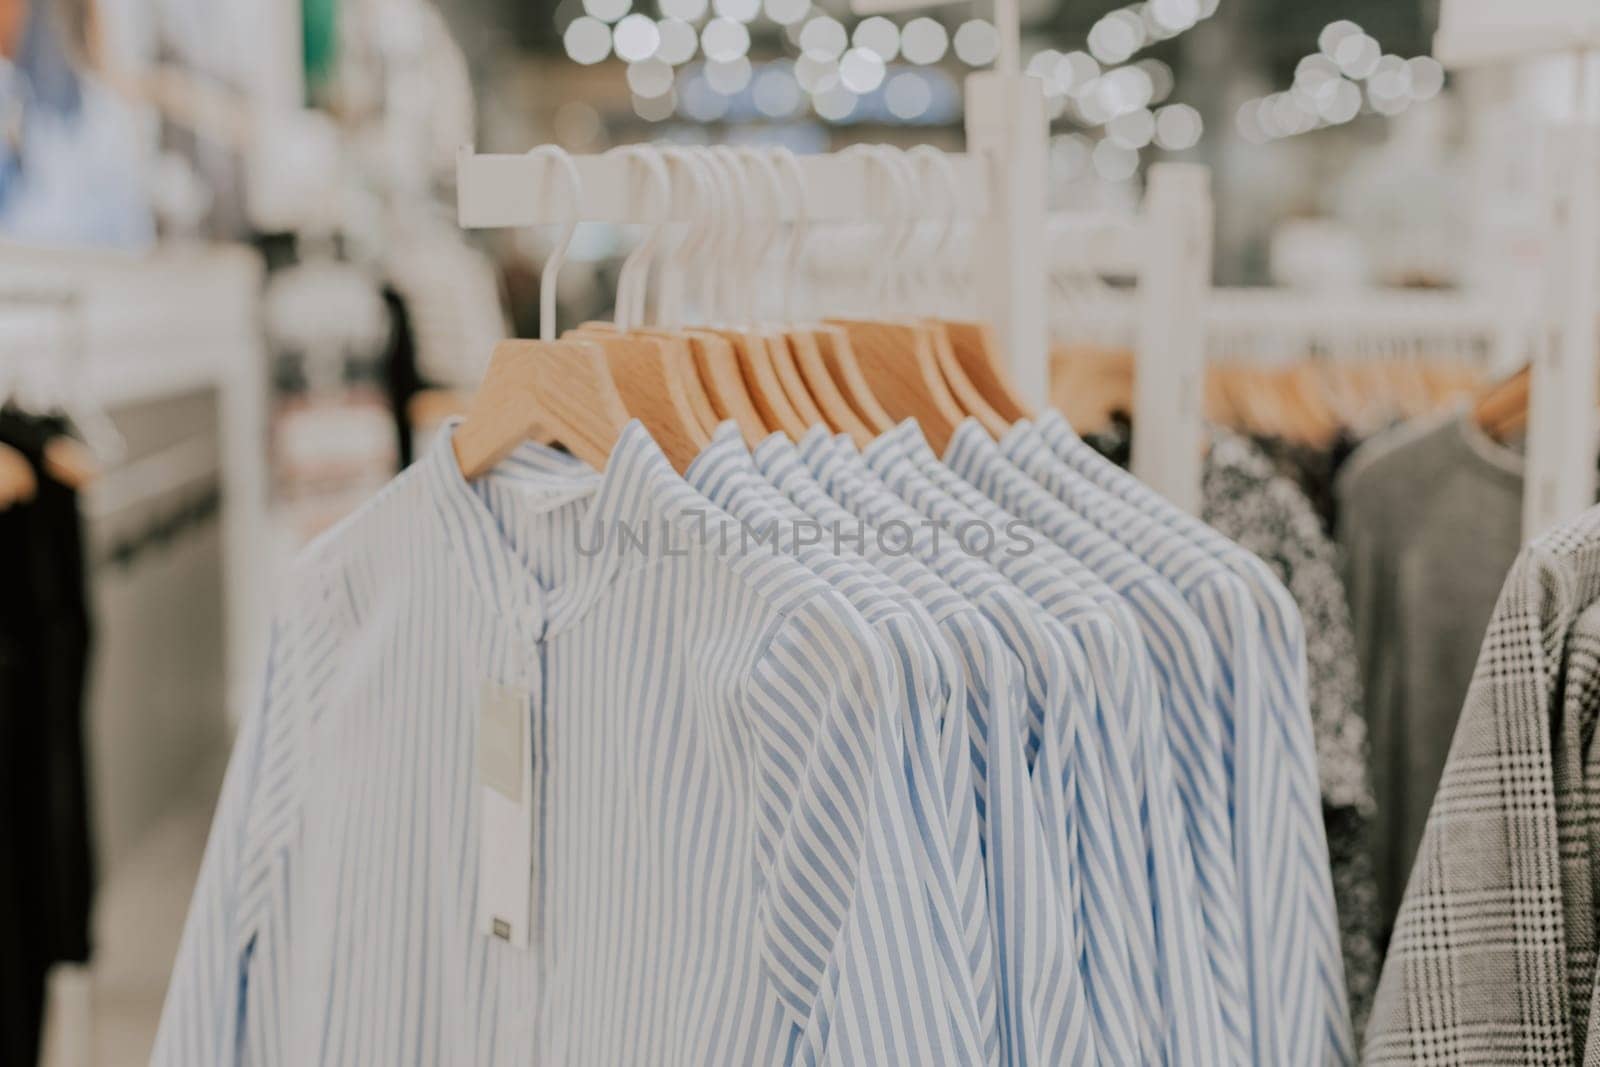 Women's blue and white striped shirts hanging on a hanger at a stand in a clothing boutique, during shopping discounts, close-up side view.